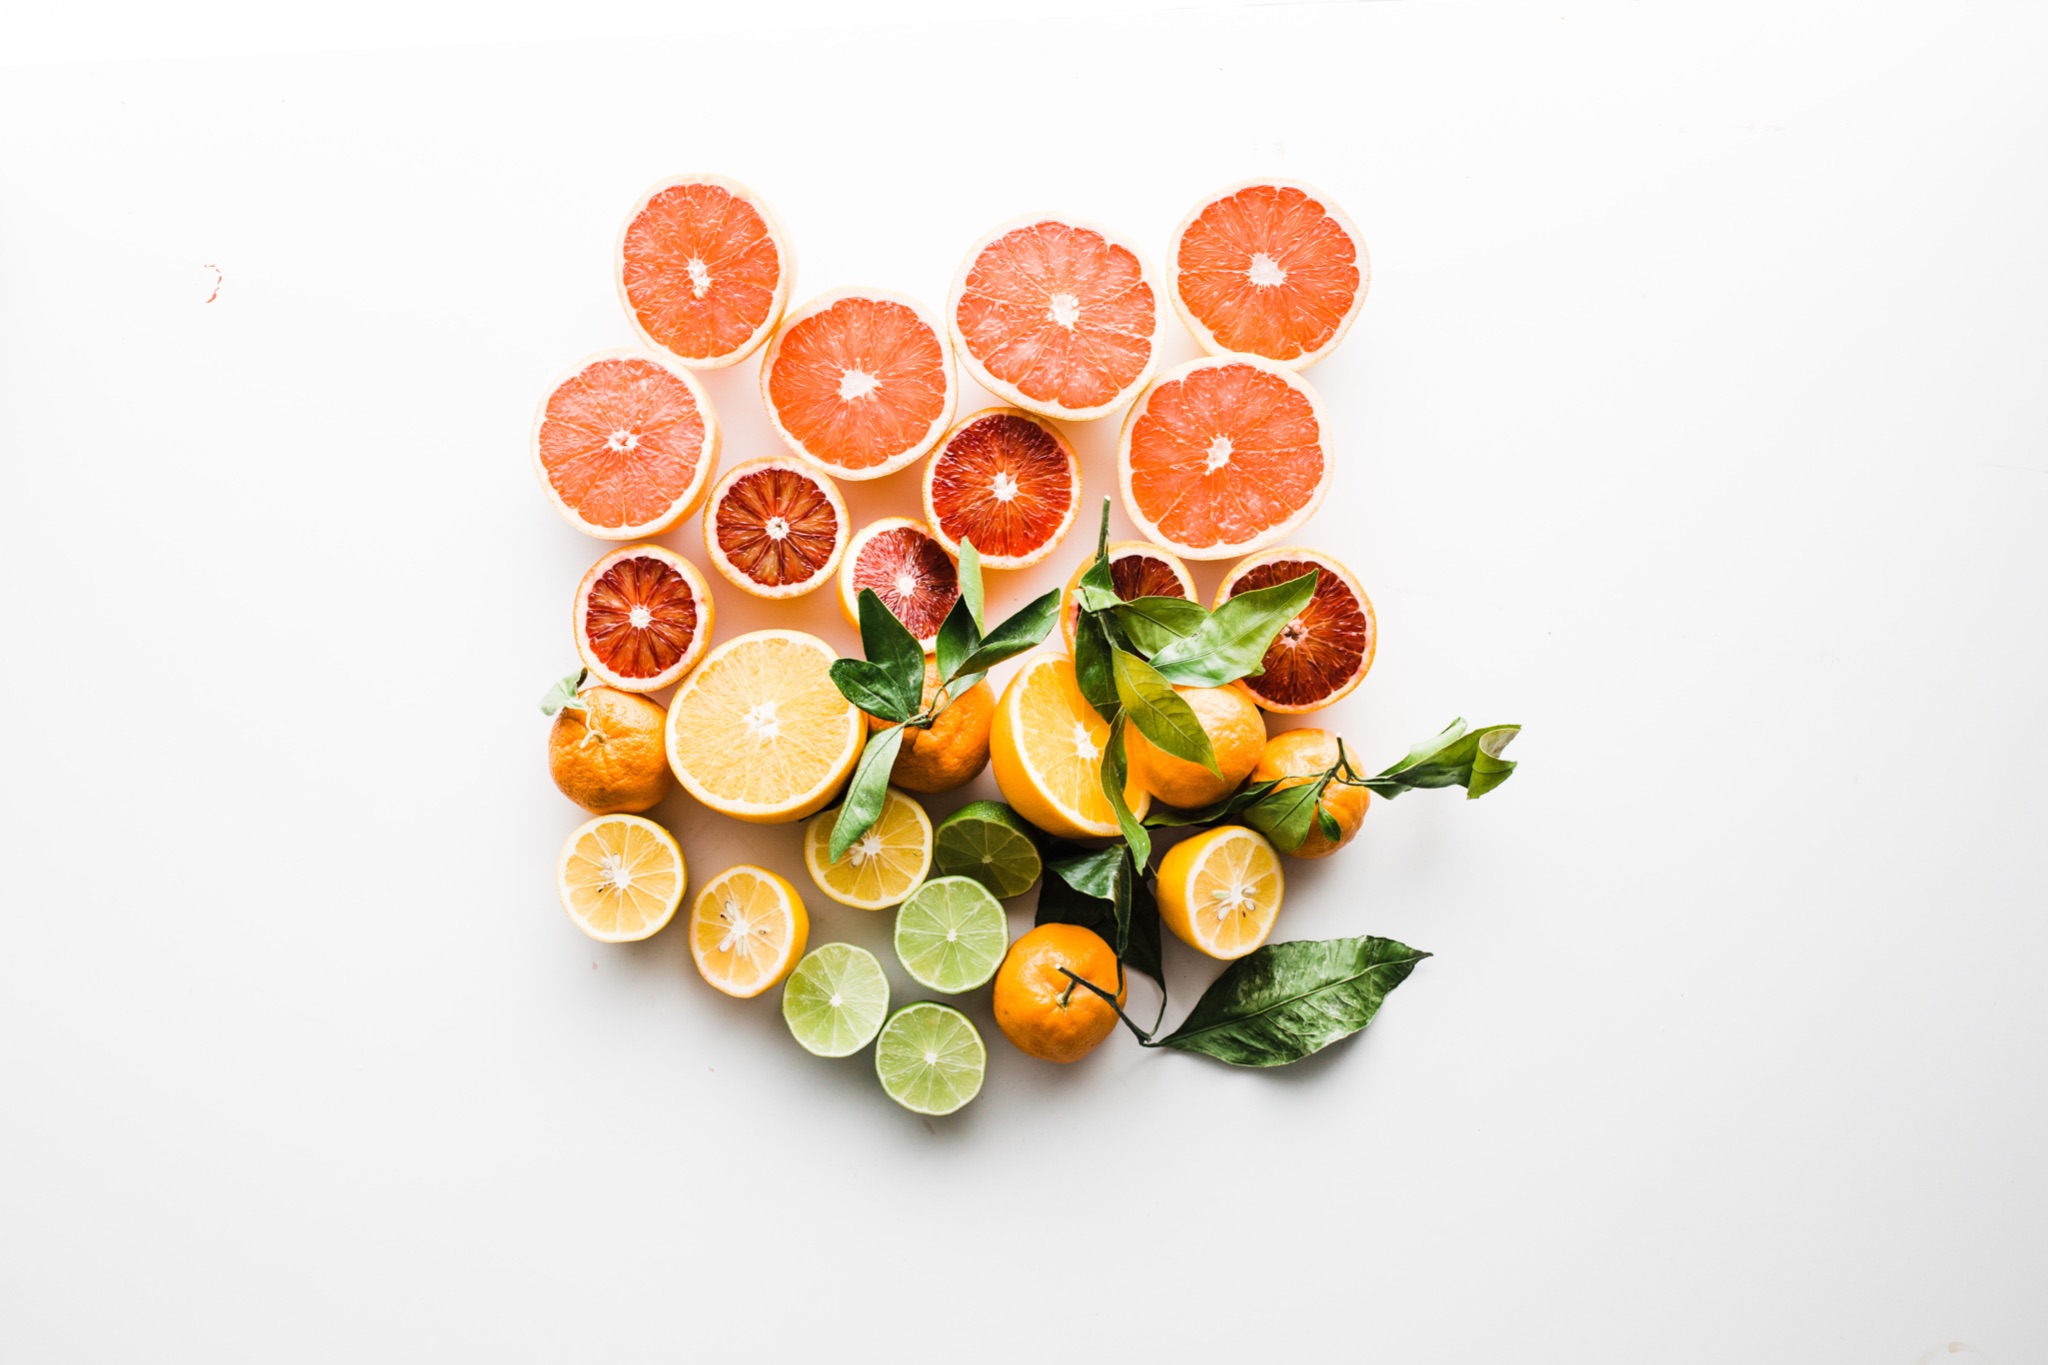 Healthy Mom Blogger 2022 Family Influencer discusses healthy foods for mental health - this is a selection of citrus fruits